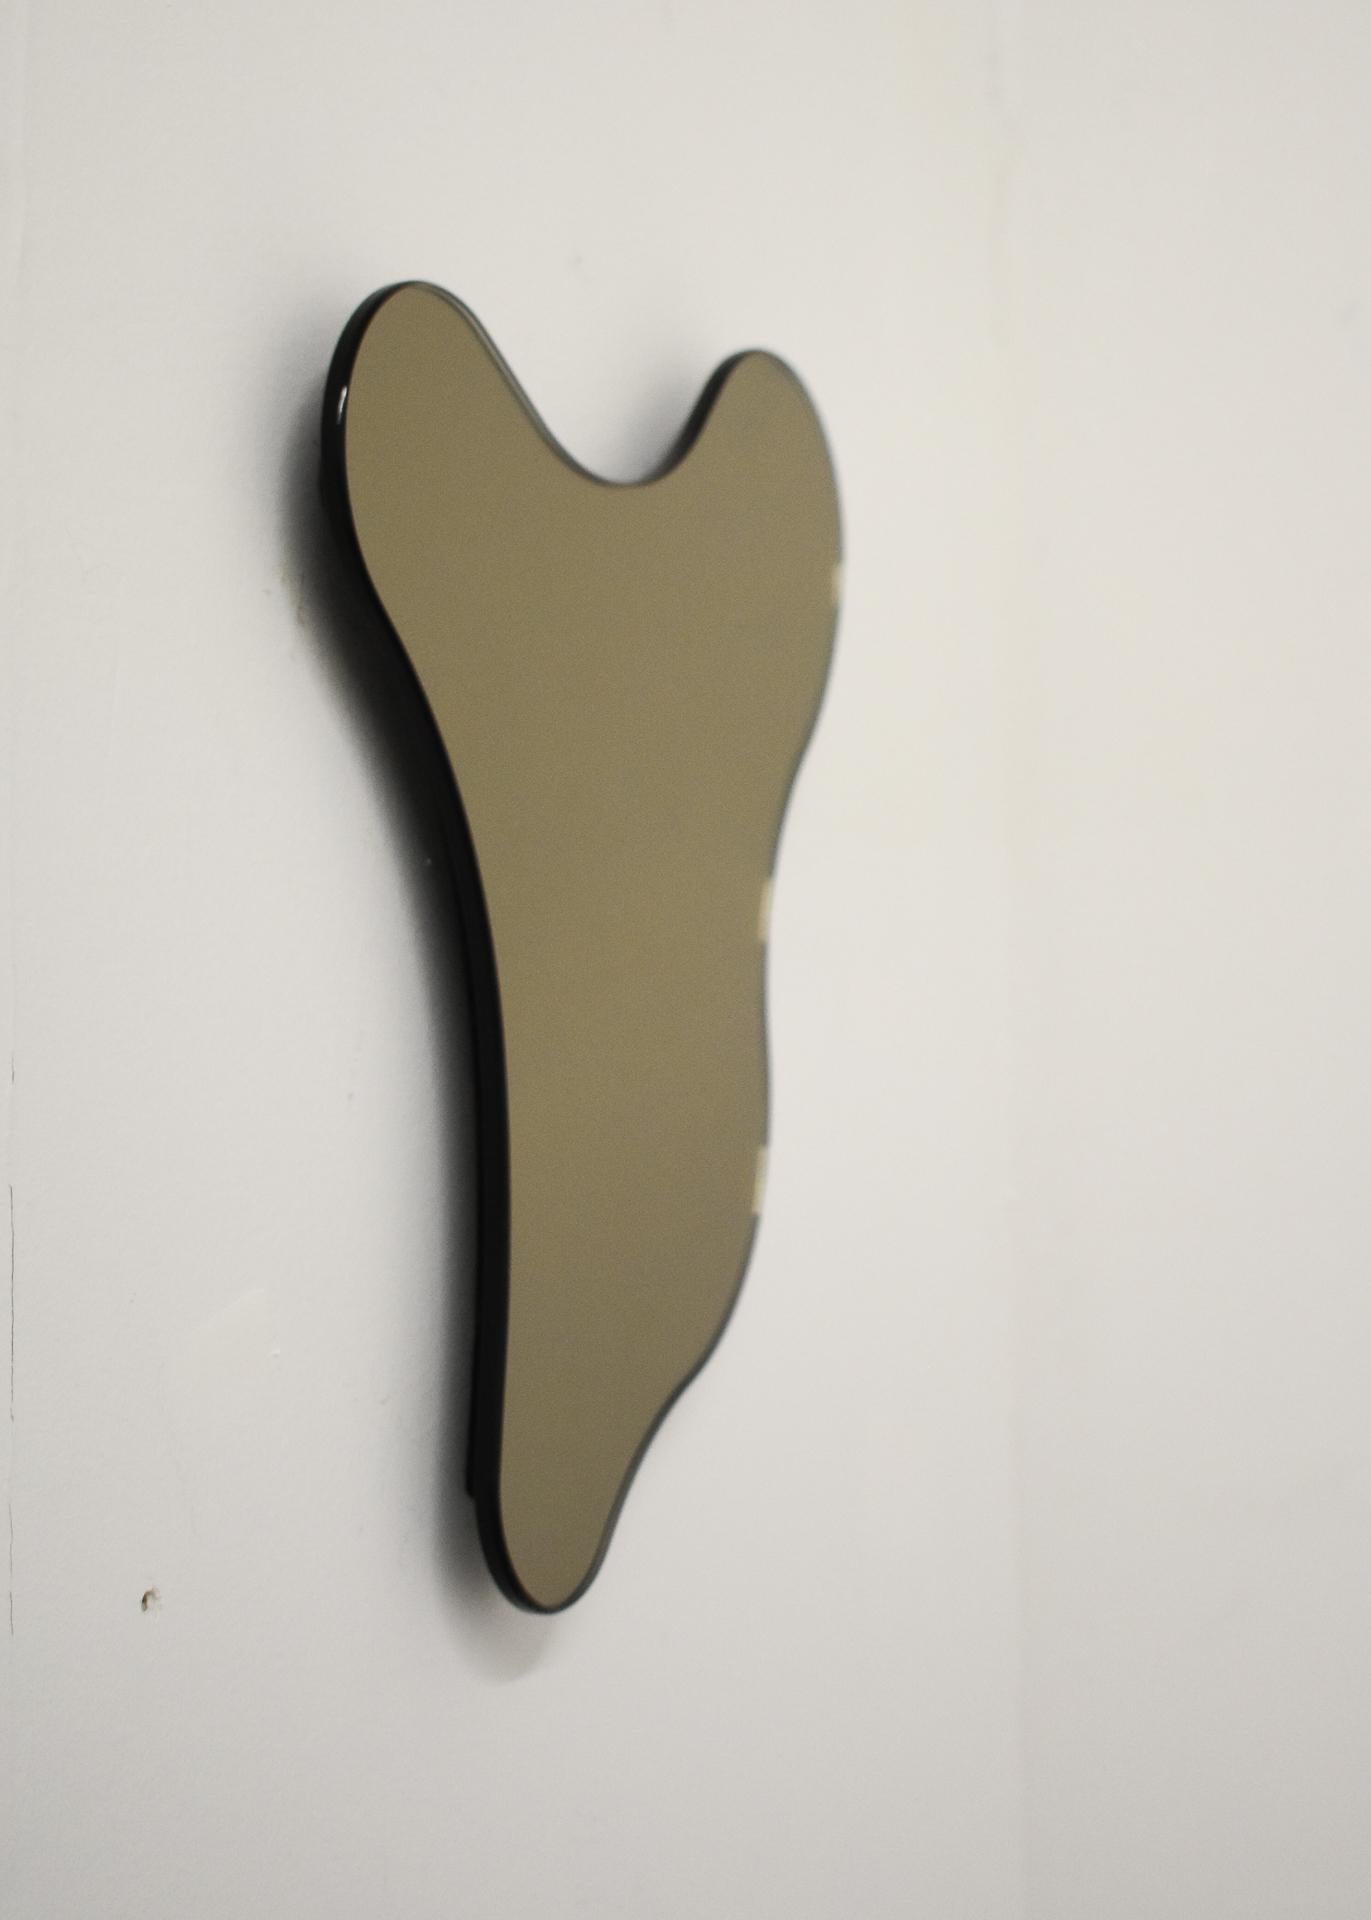 ISLA MIRROR - No. 1
Materials: Bronze Glass, Black MDF 
Dimensions: 10.25”W X 1”D X 11”H

Minimalist, elegant, amorphically shaped floating bronze glass mirrors inspired by the topography of the Philippine archipelago. The ISLA Mirrors are